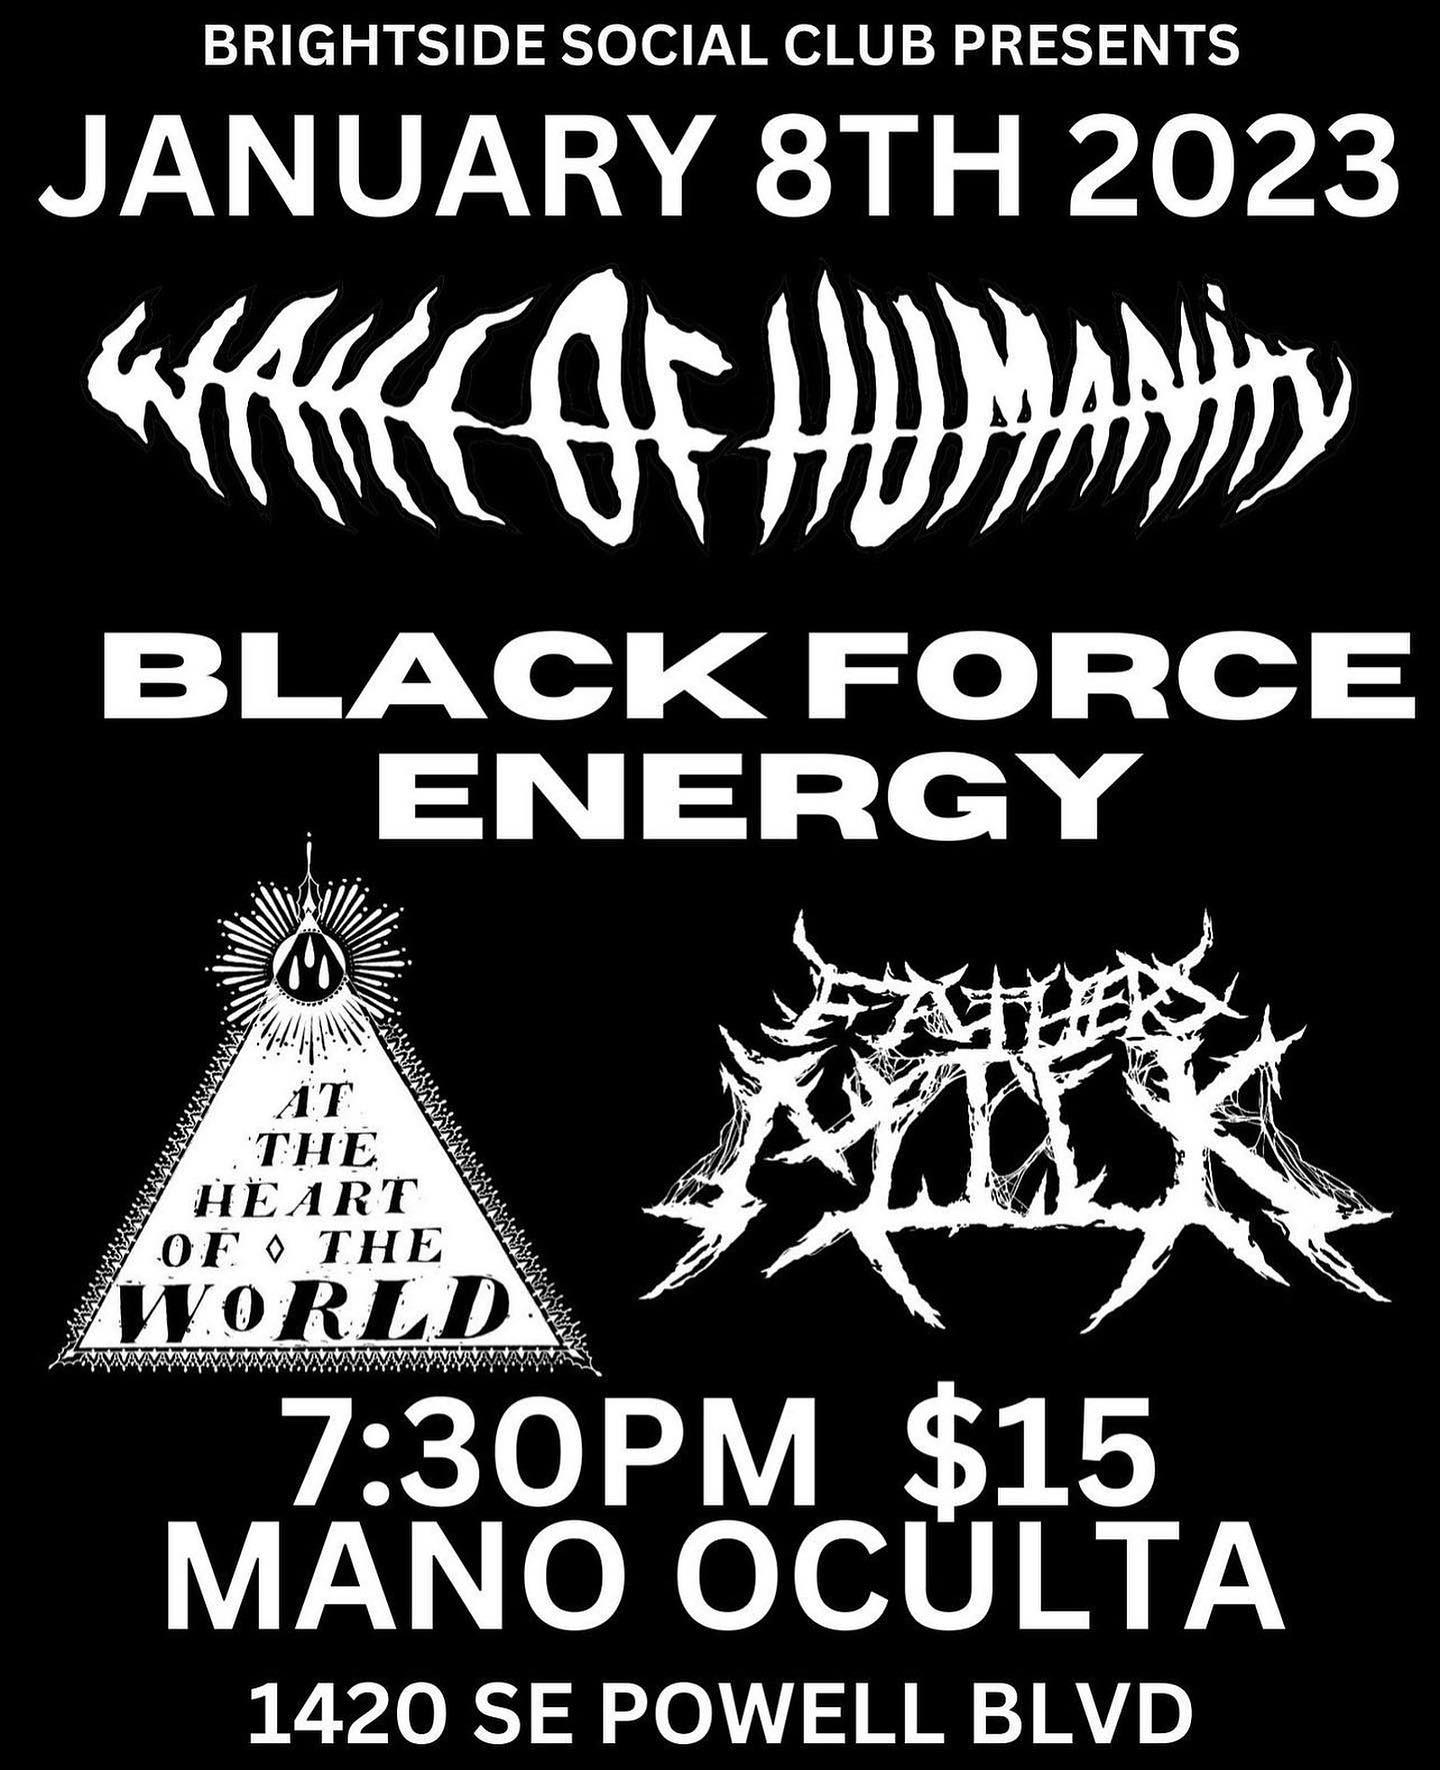 The Return of Wake of Humanity, At the Heart of the World, Black Force Energy, Father’s Milk